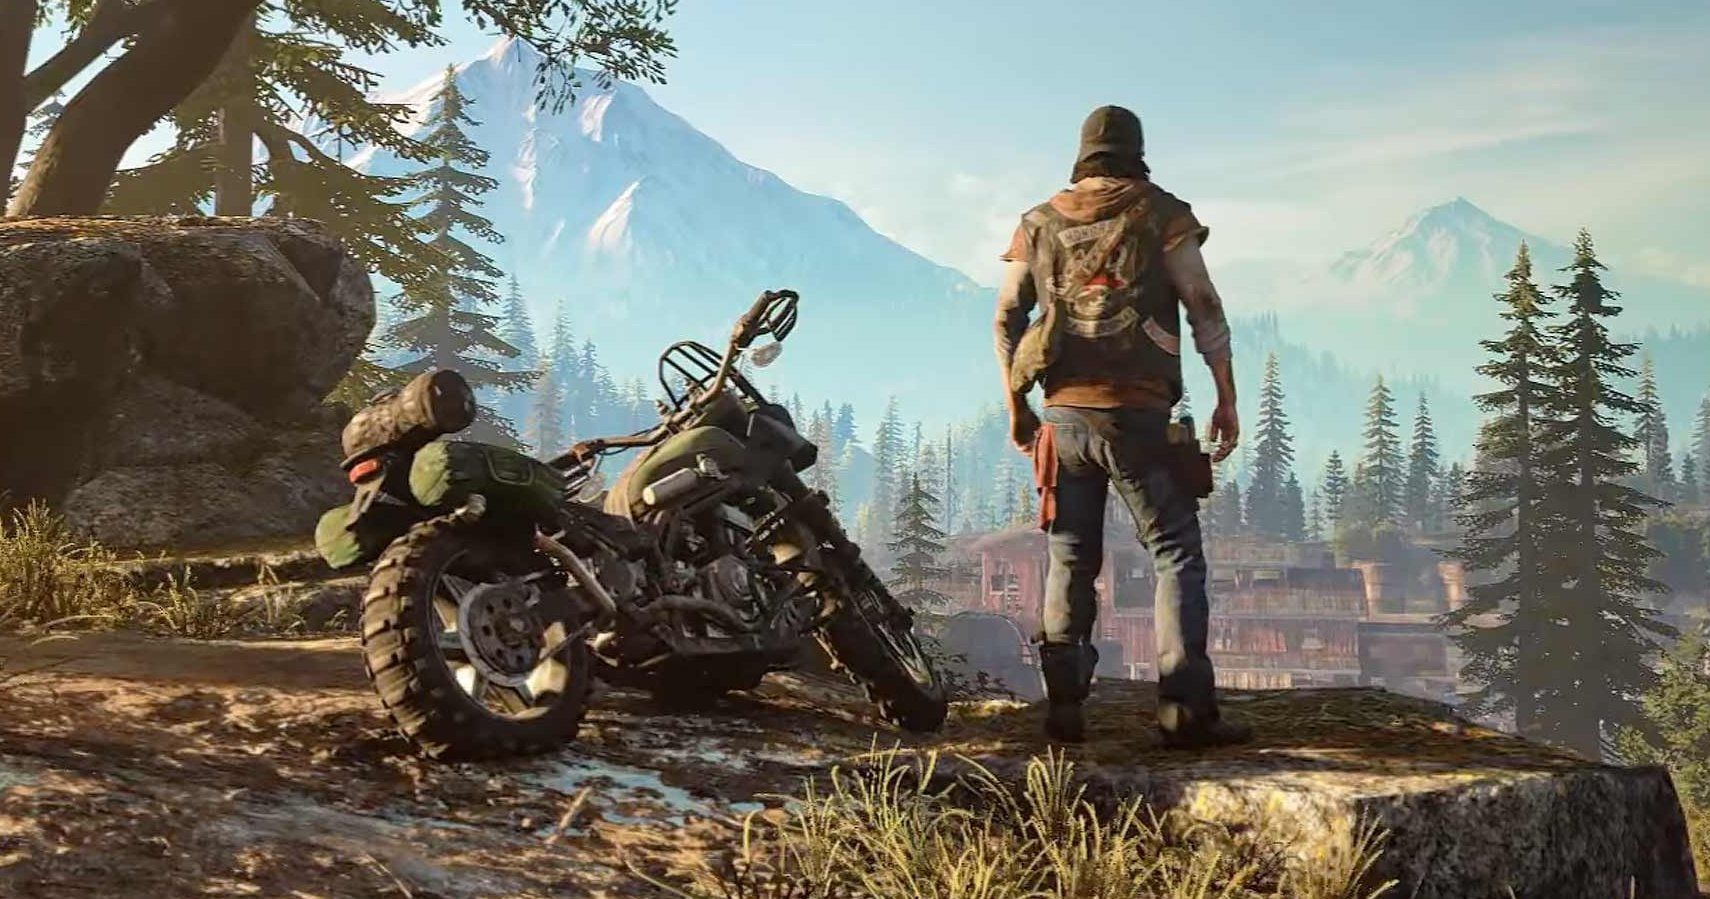 PlayStations Croatian Branch Sent Actual Bikers To Deliver A Review Copy Of Days Gone